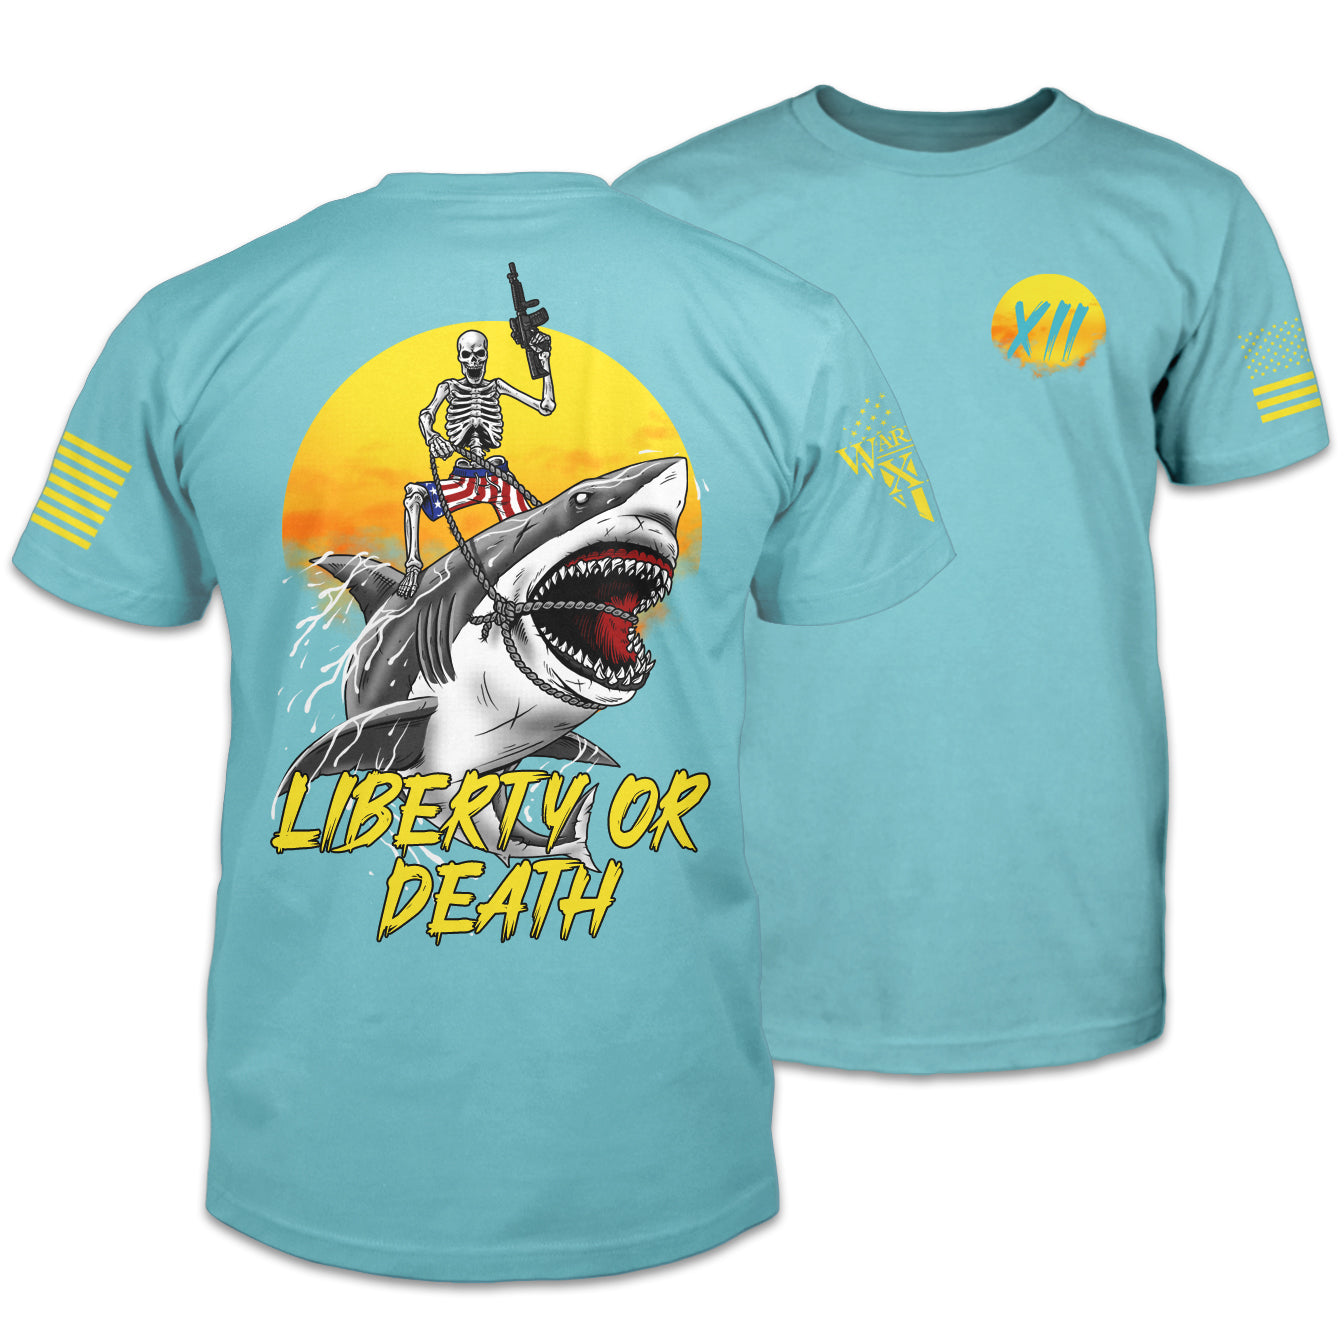 The front and back of a Tahiti Blue shirt with an image on the back of a skeleton wearing American Flag shorts riding a shark, holding a short barrel rifle, in front of a setting sun with the words "Liberty or Death" underneath.